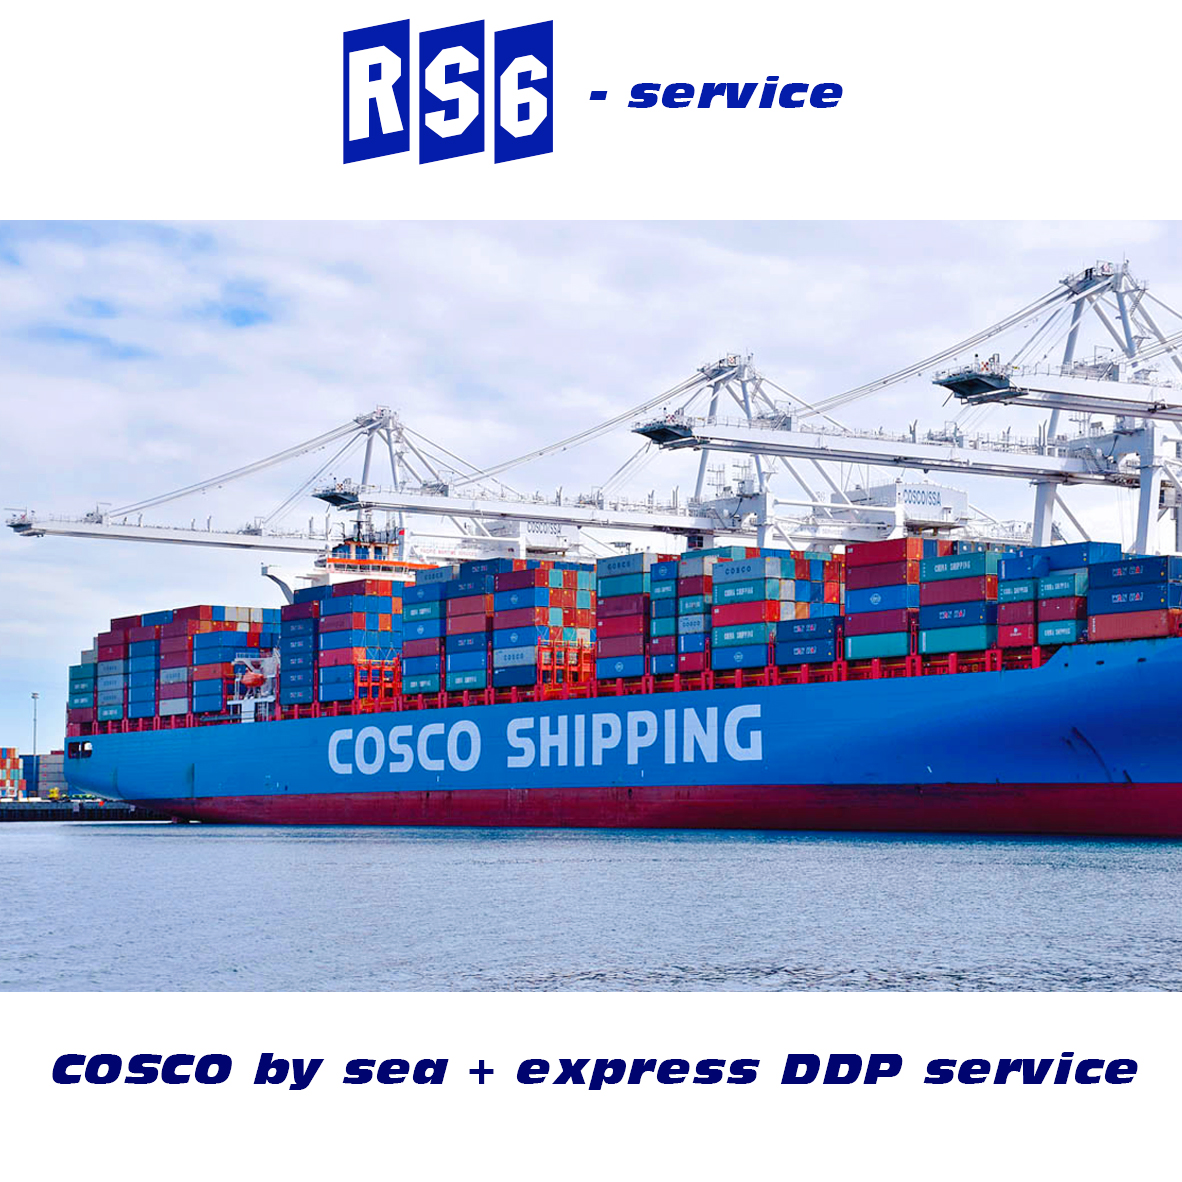 COSCO RS6 by sea+express DDP service